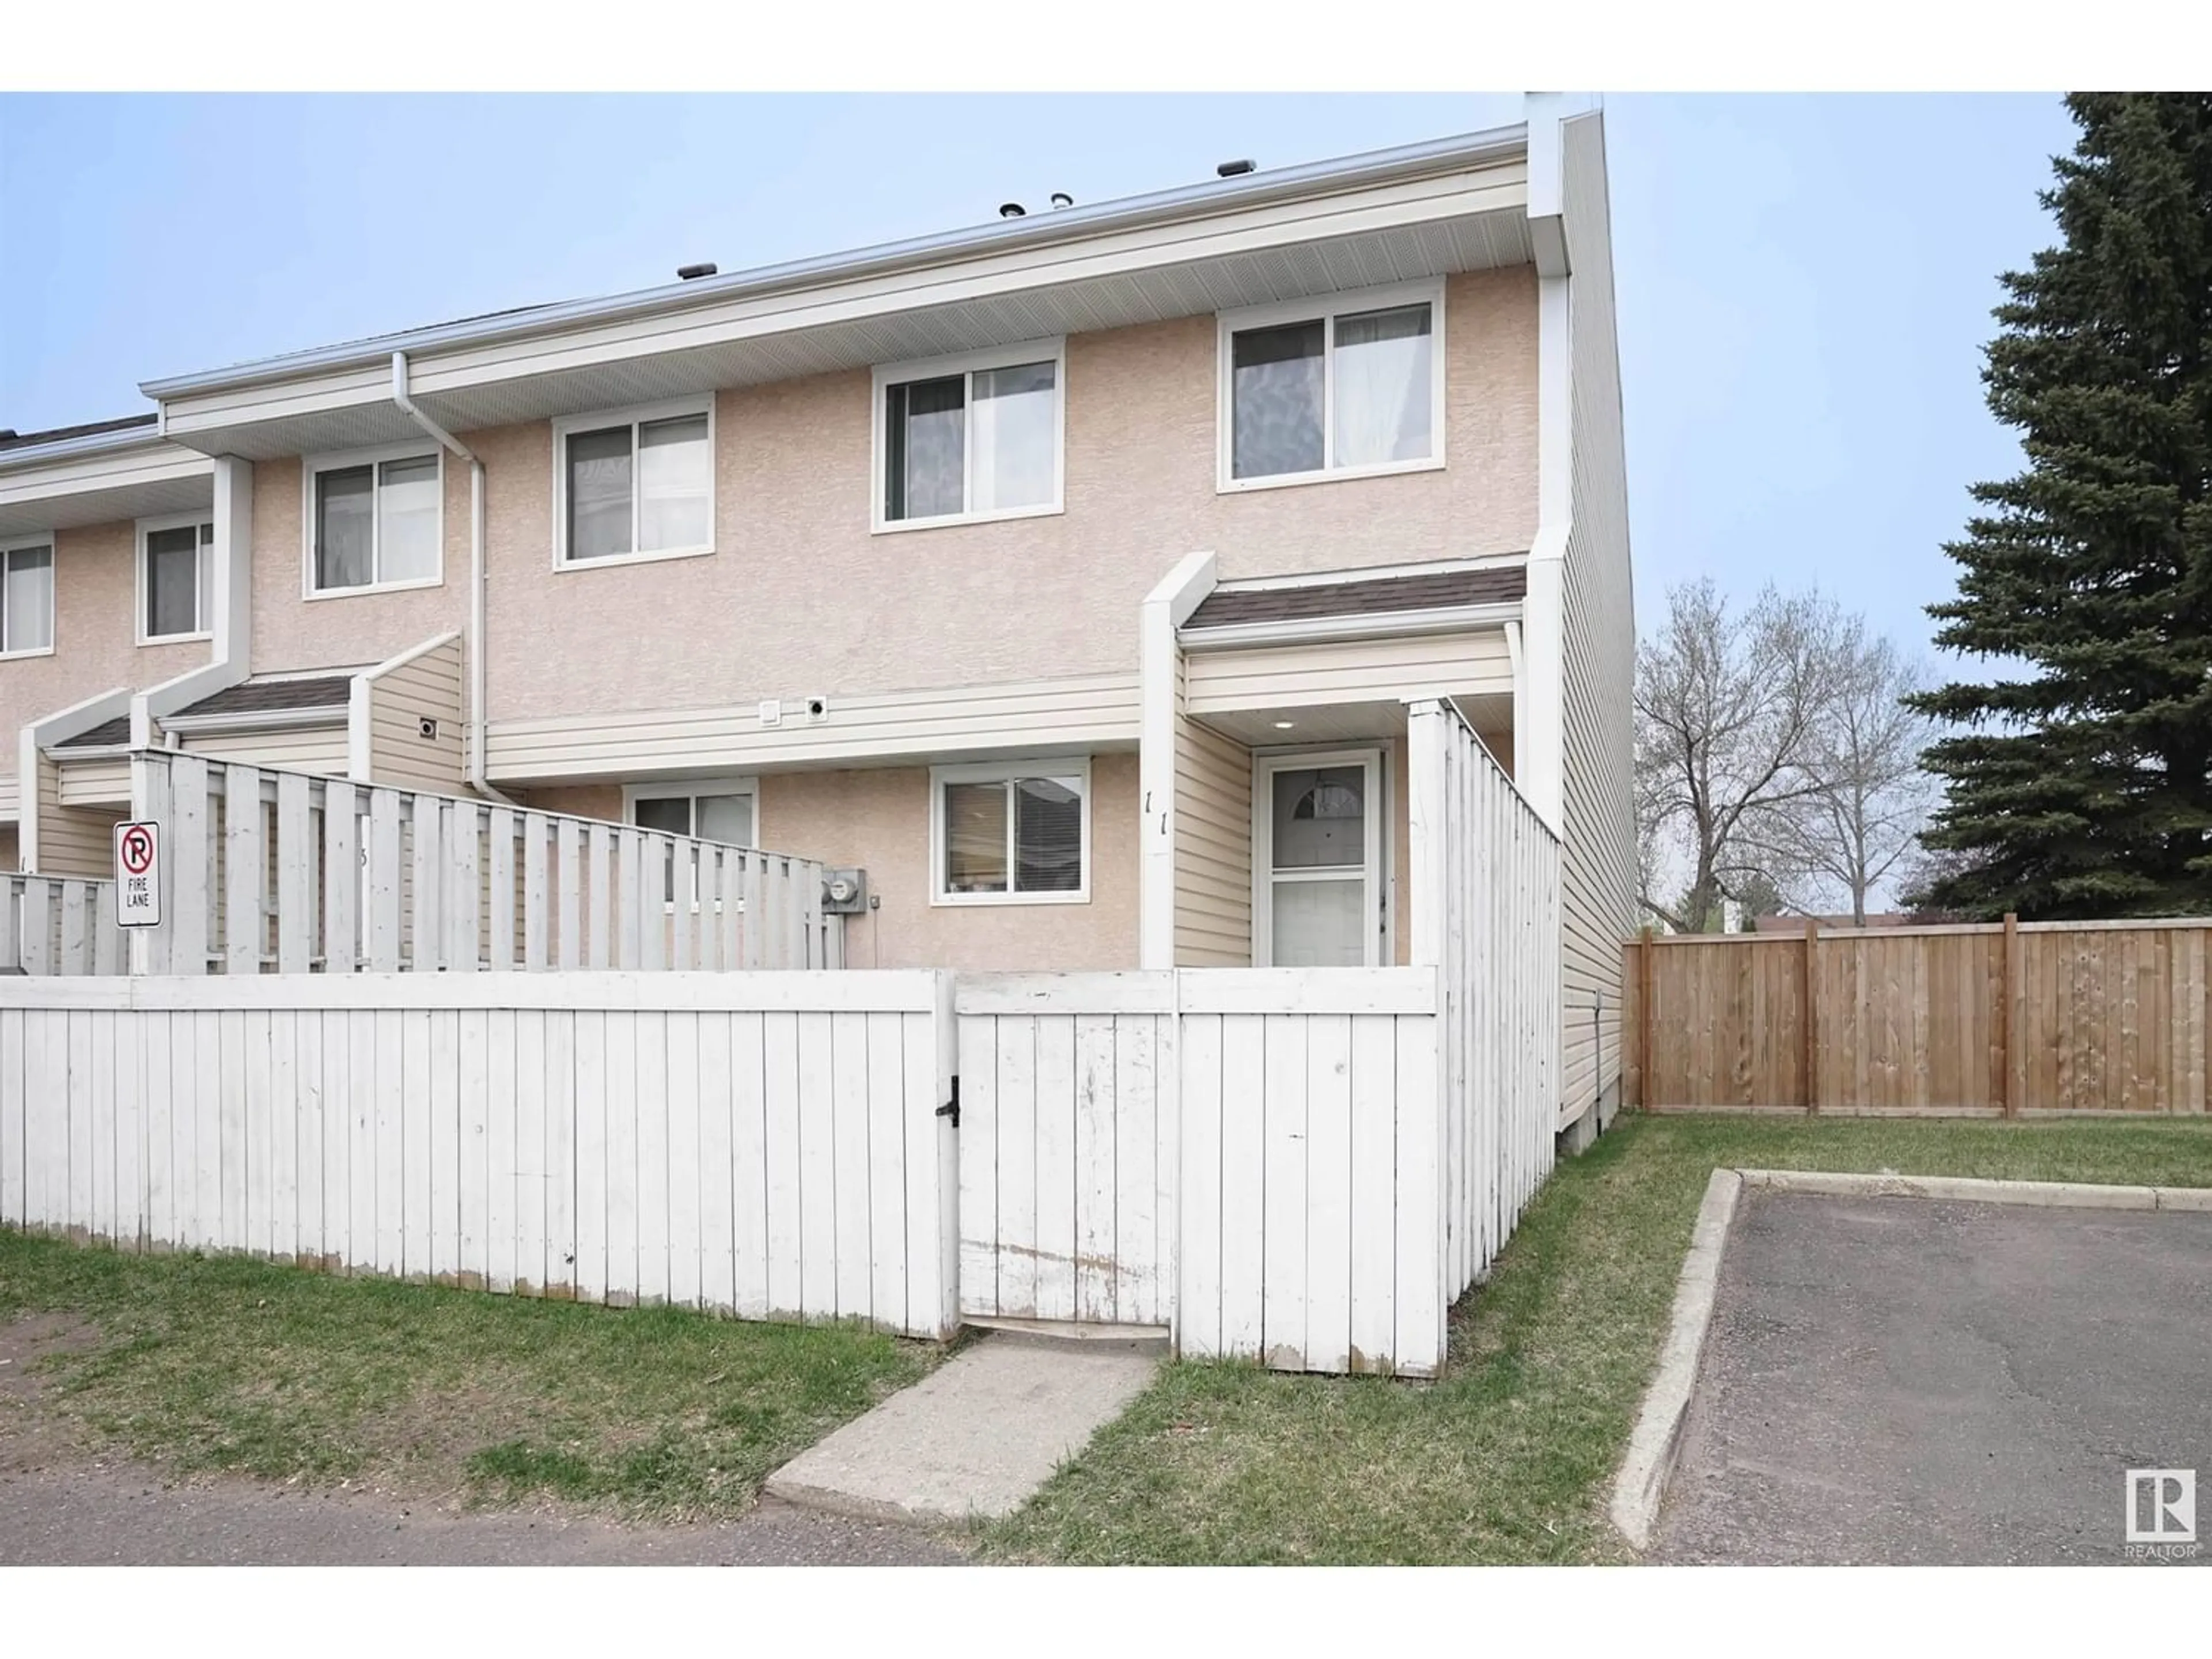 A pic from exterior of the house or condo for 16511 100 ST NW, Edmonton Alberta T5X5H4